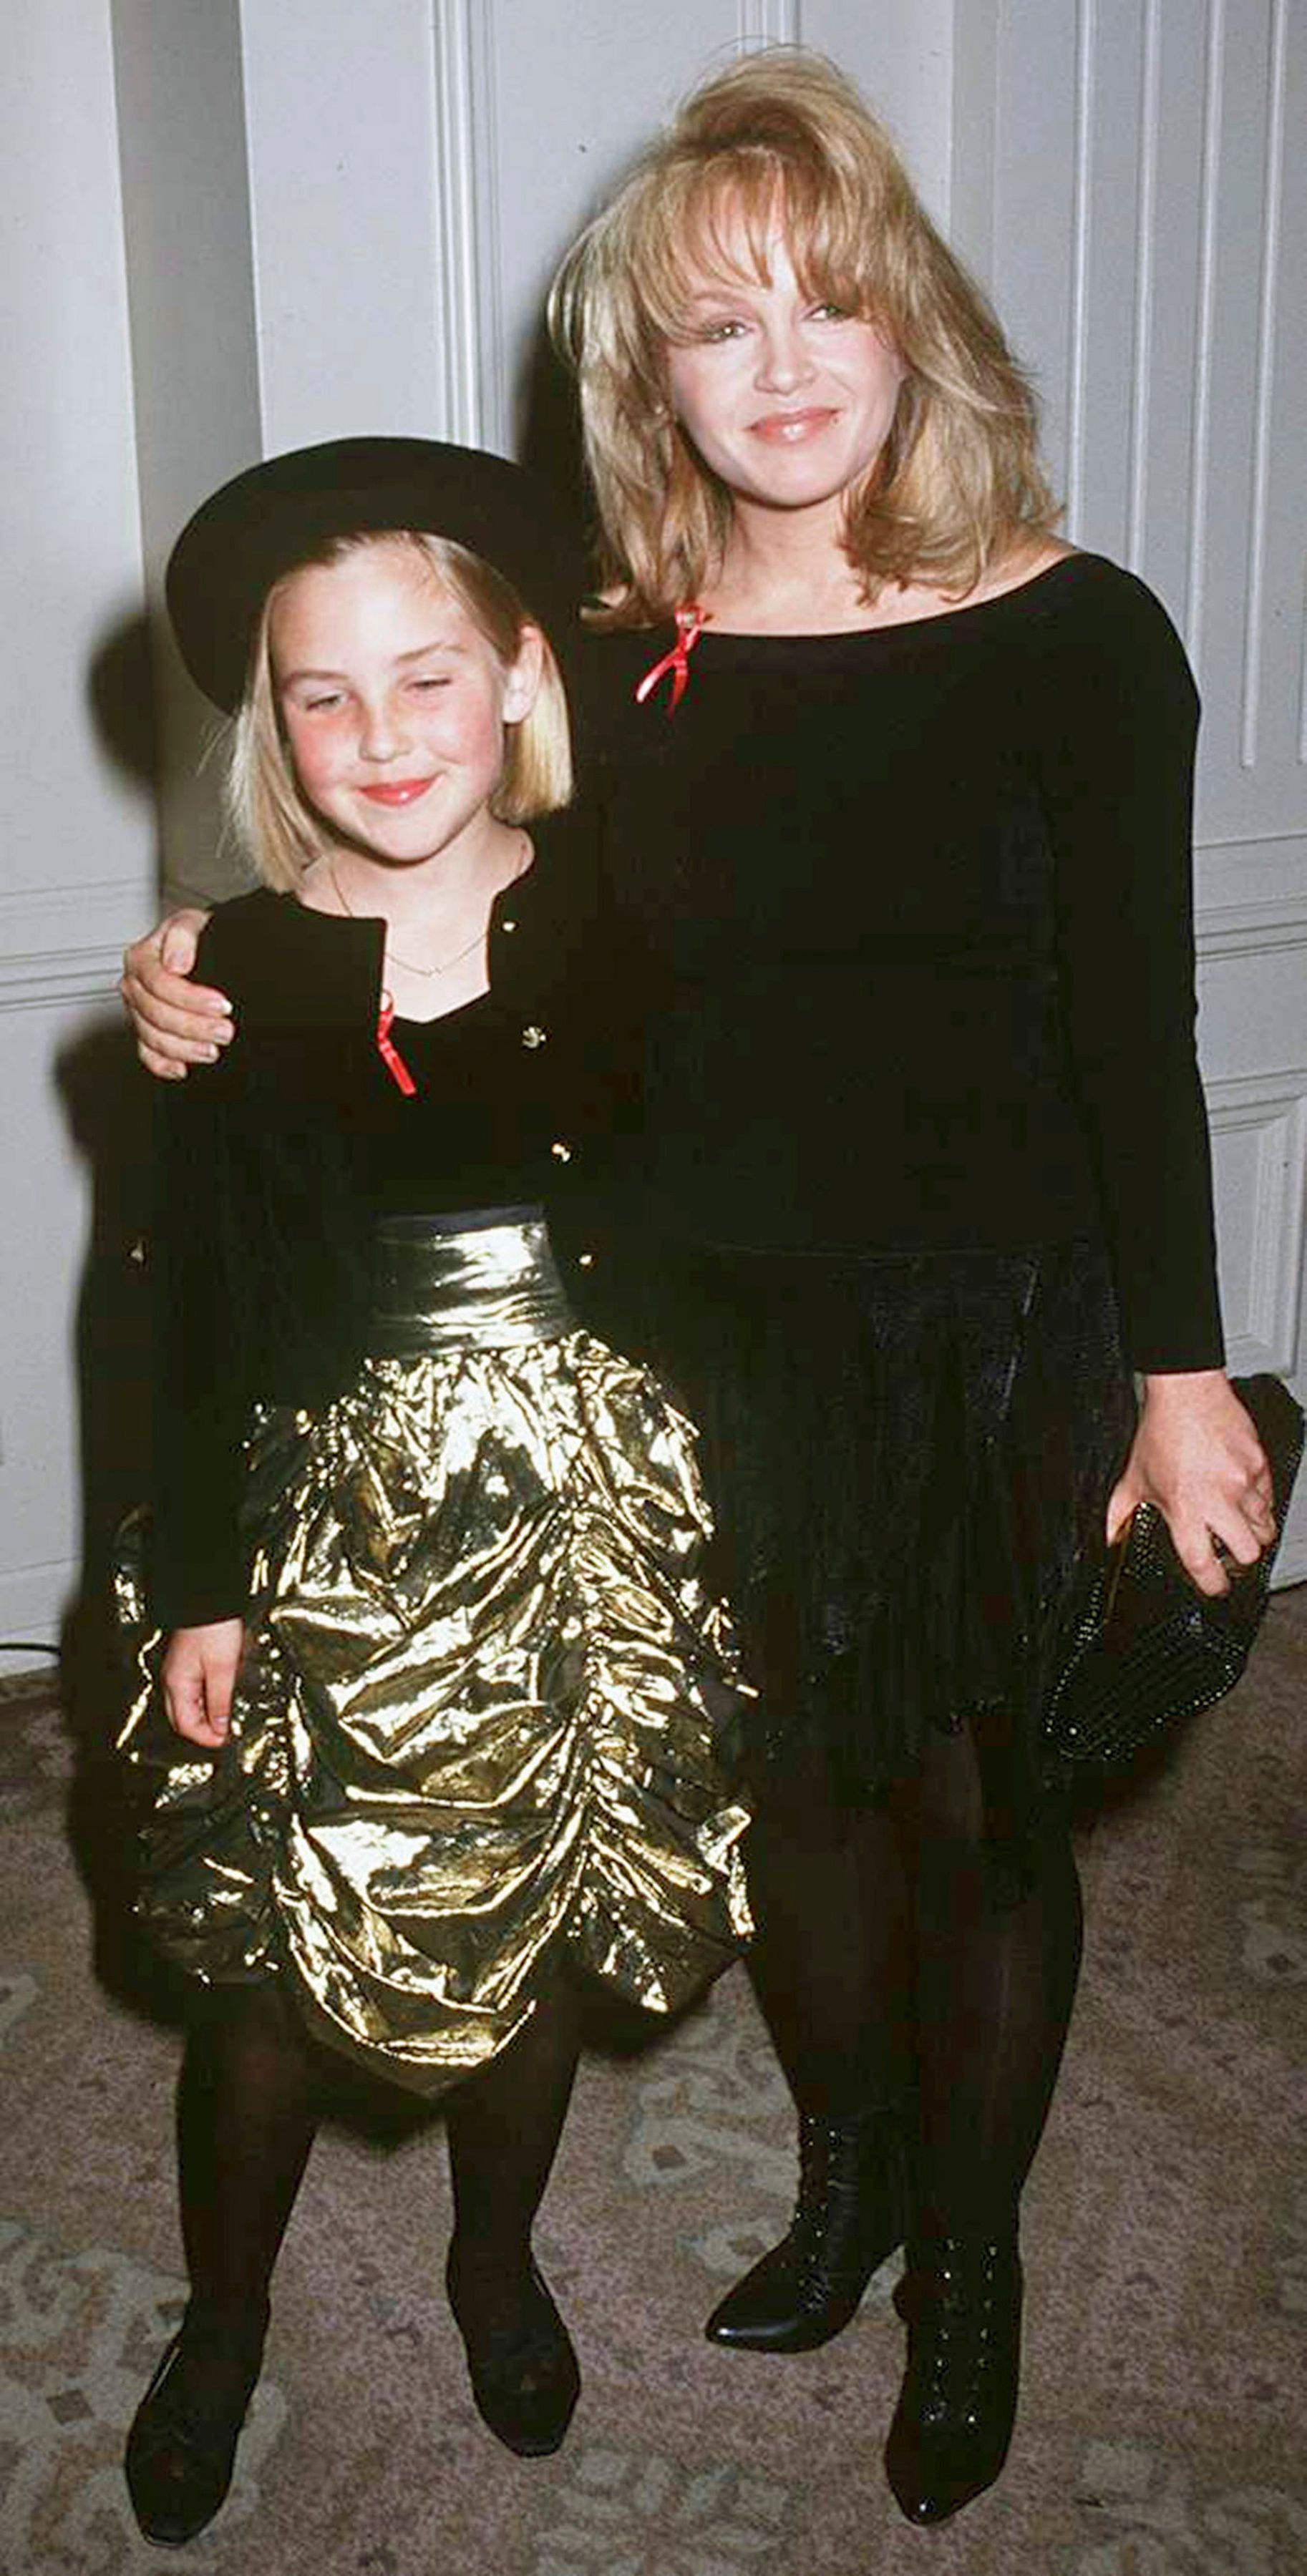 Charlene Tilton and daughter Cherish Lee at the 22nd Annual Nosotros Golden Eagle Awards in Beverly Hills, California, on June 5, 1992. | Source: Kypros/Getty Images